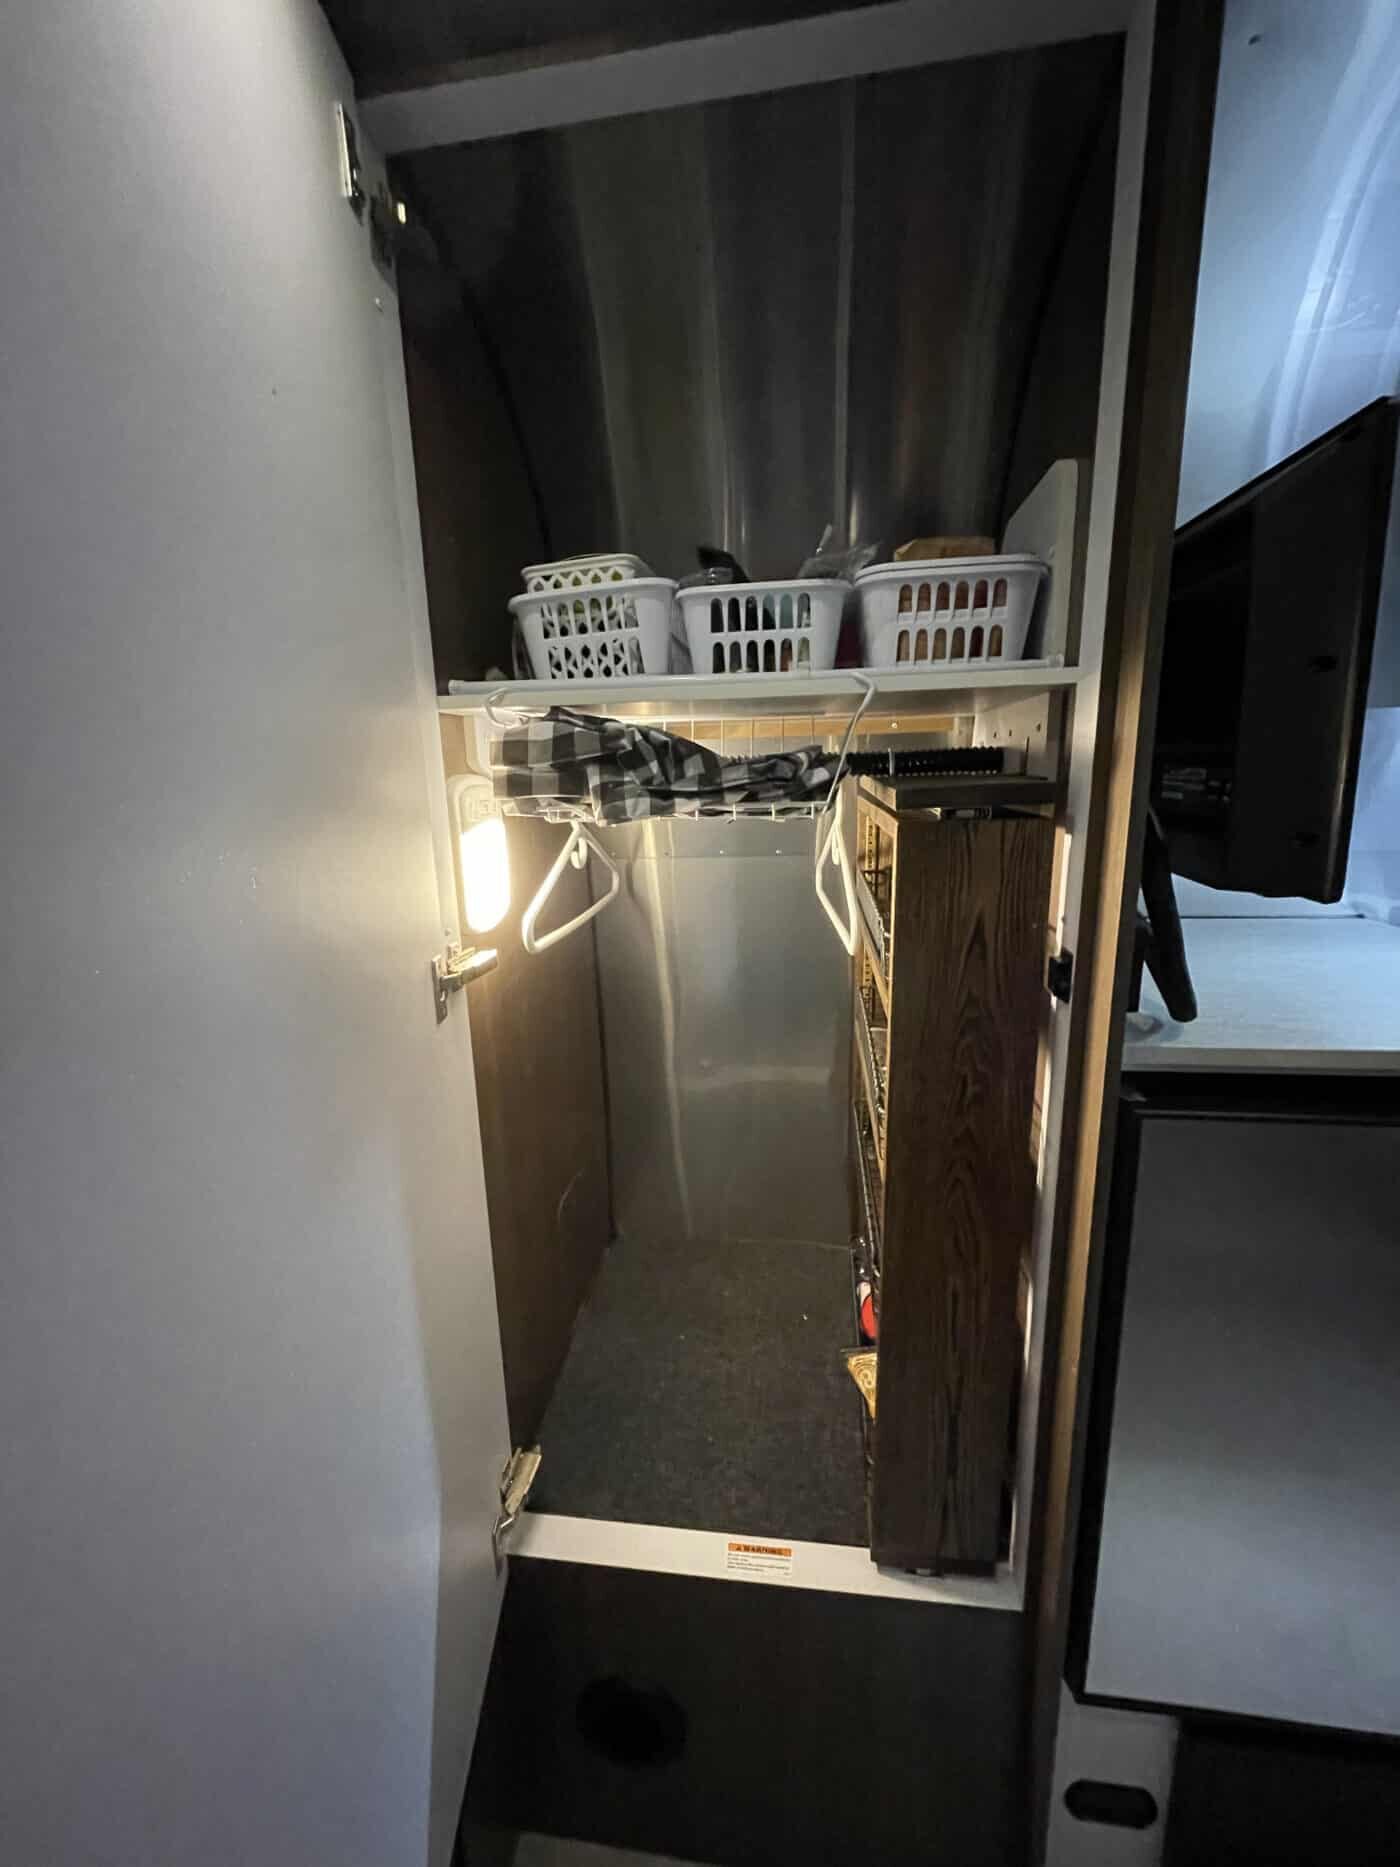 2022 22FT Caravel For Sale In Chattanooga, Tennessee - Airstream ...